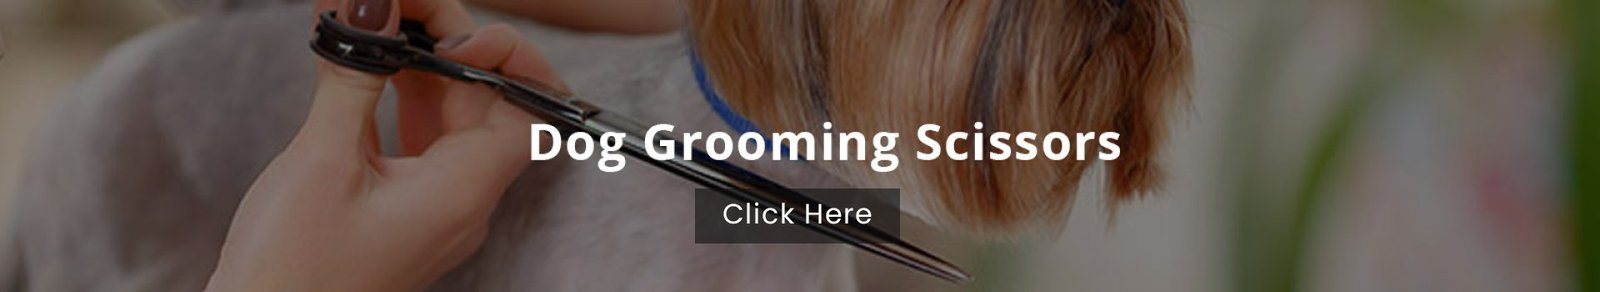 Dog Grooming scissors category